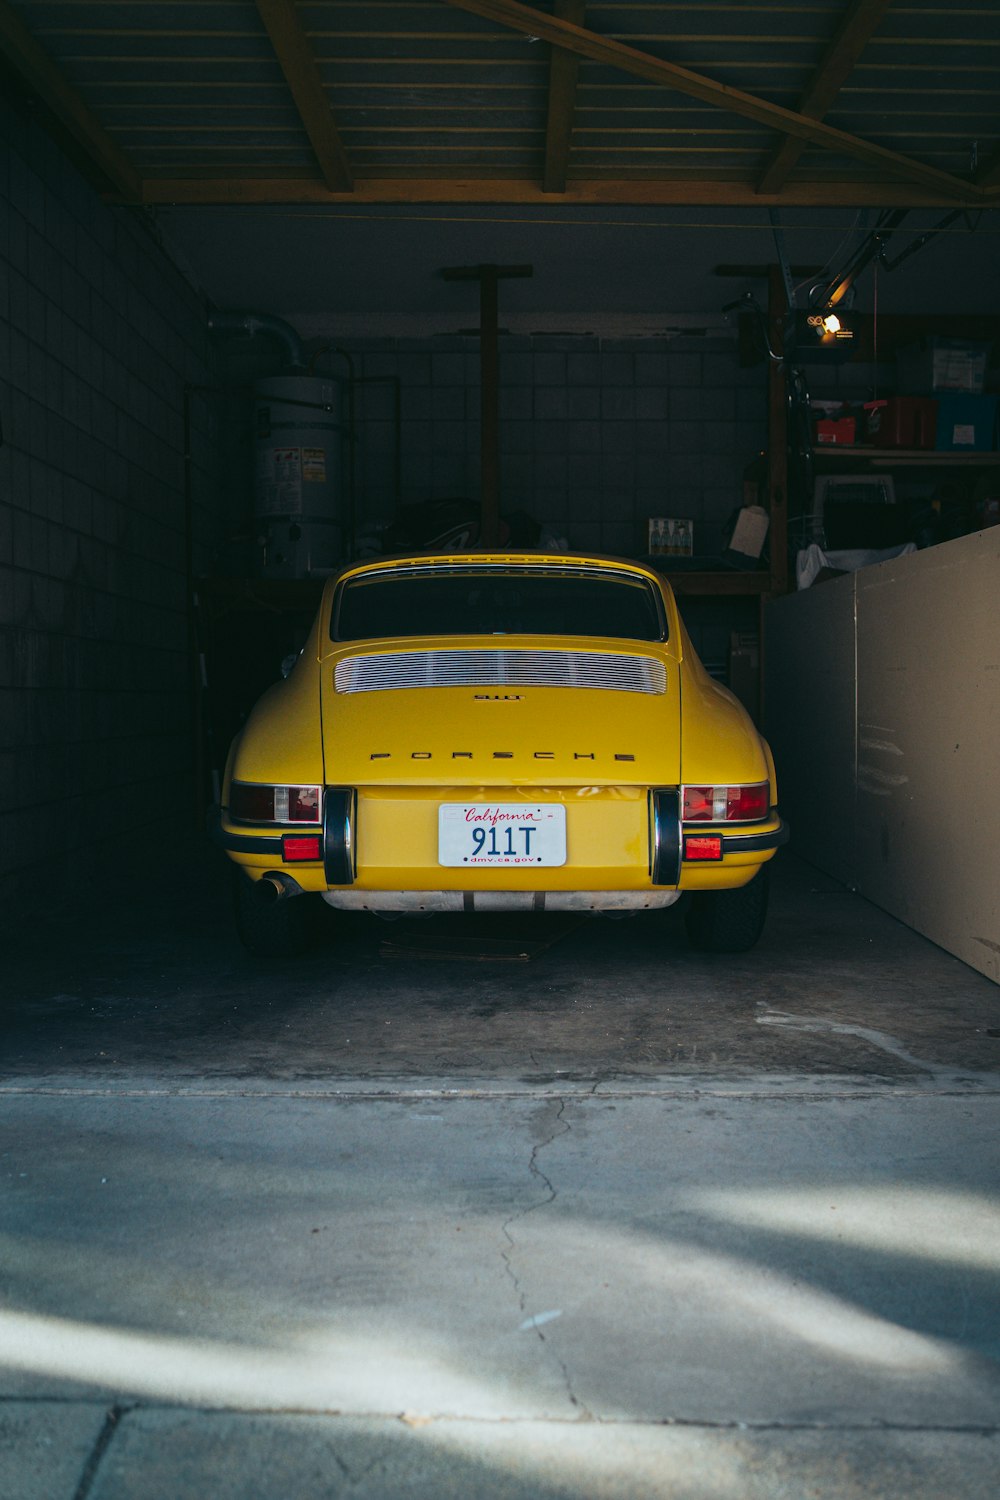 a yellow car is parked in a garage